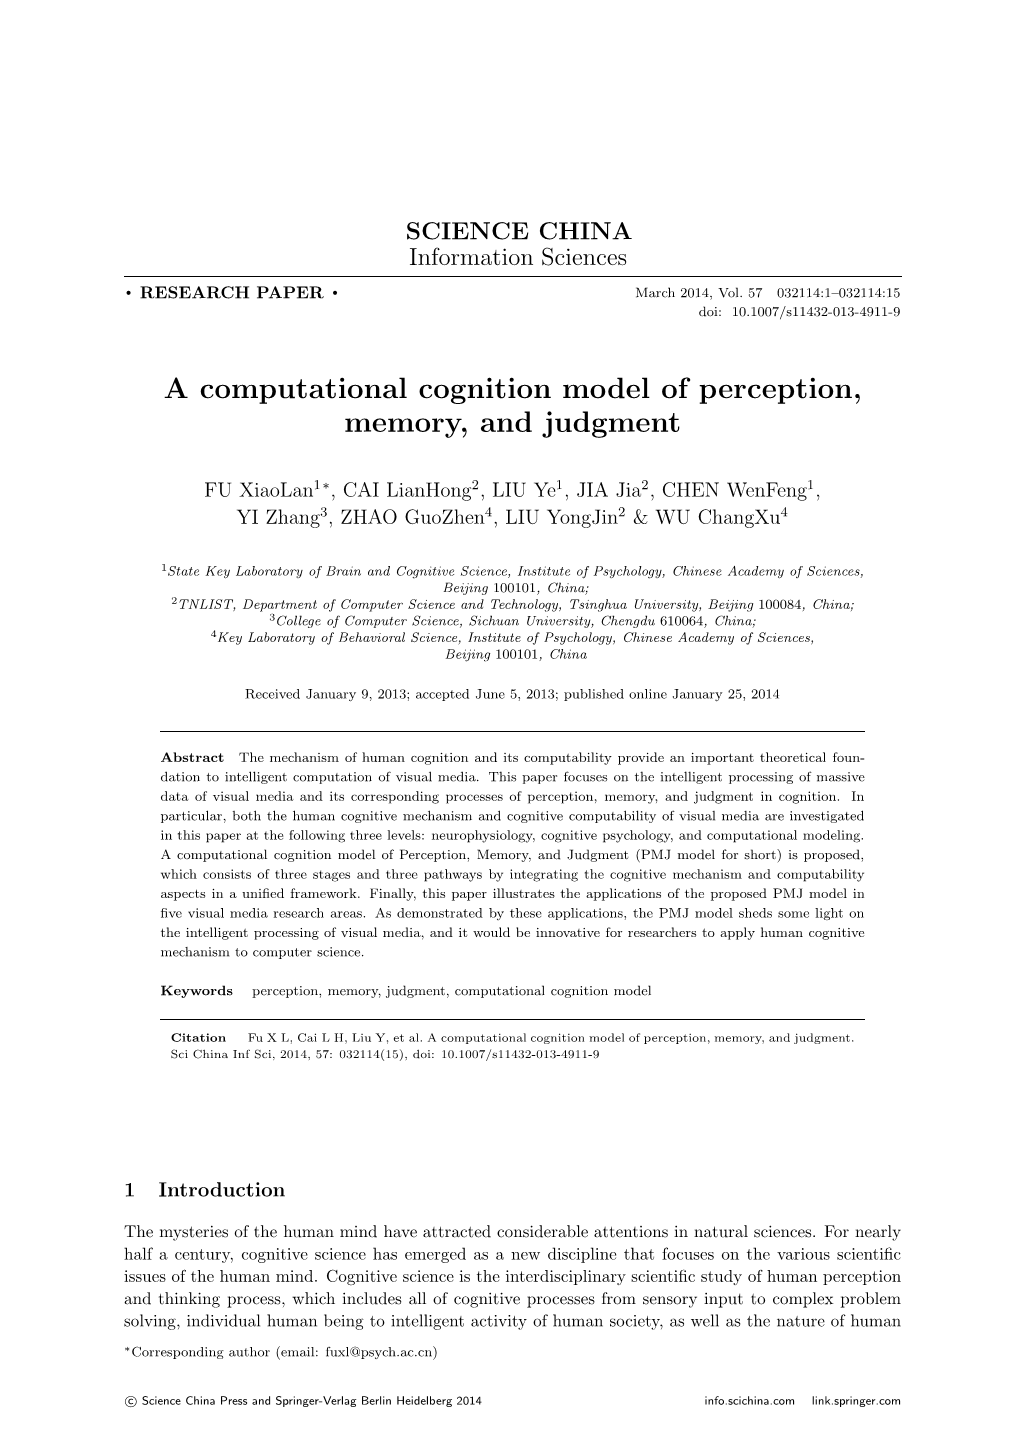 A Computational Cognition Model of Perception, Memory, and Judgment